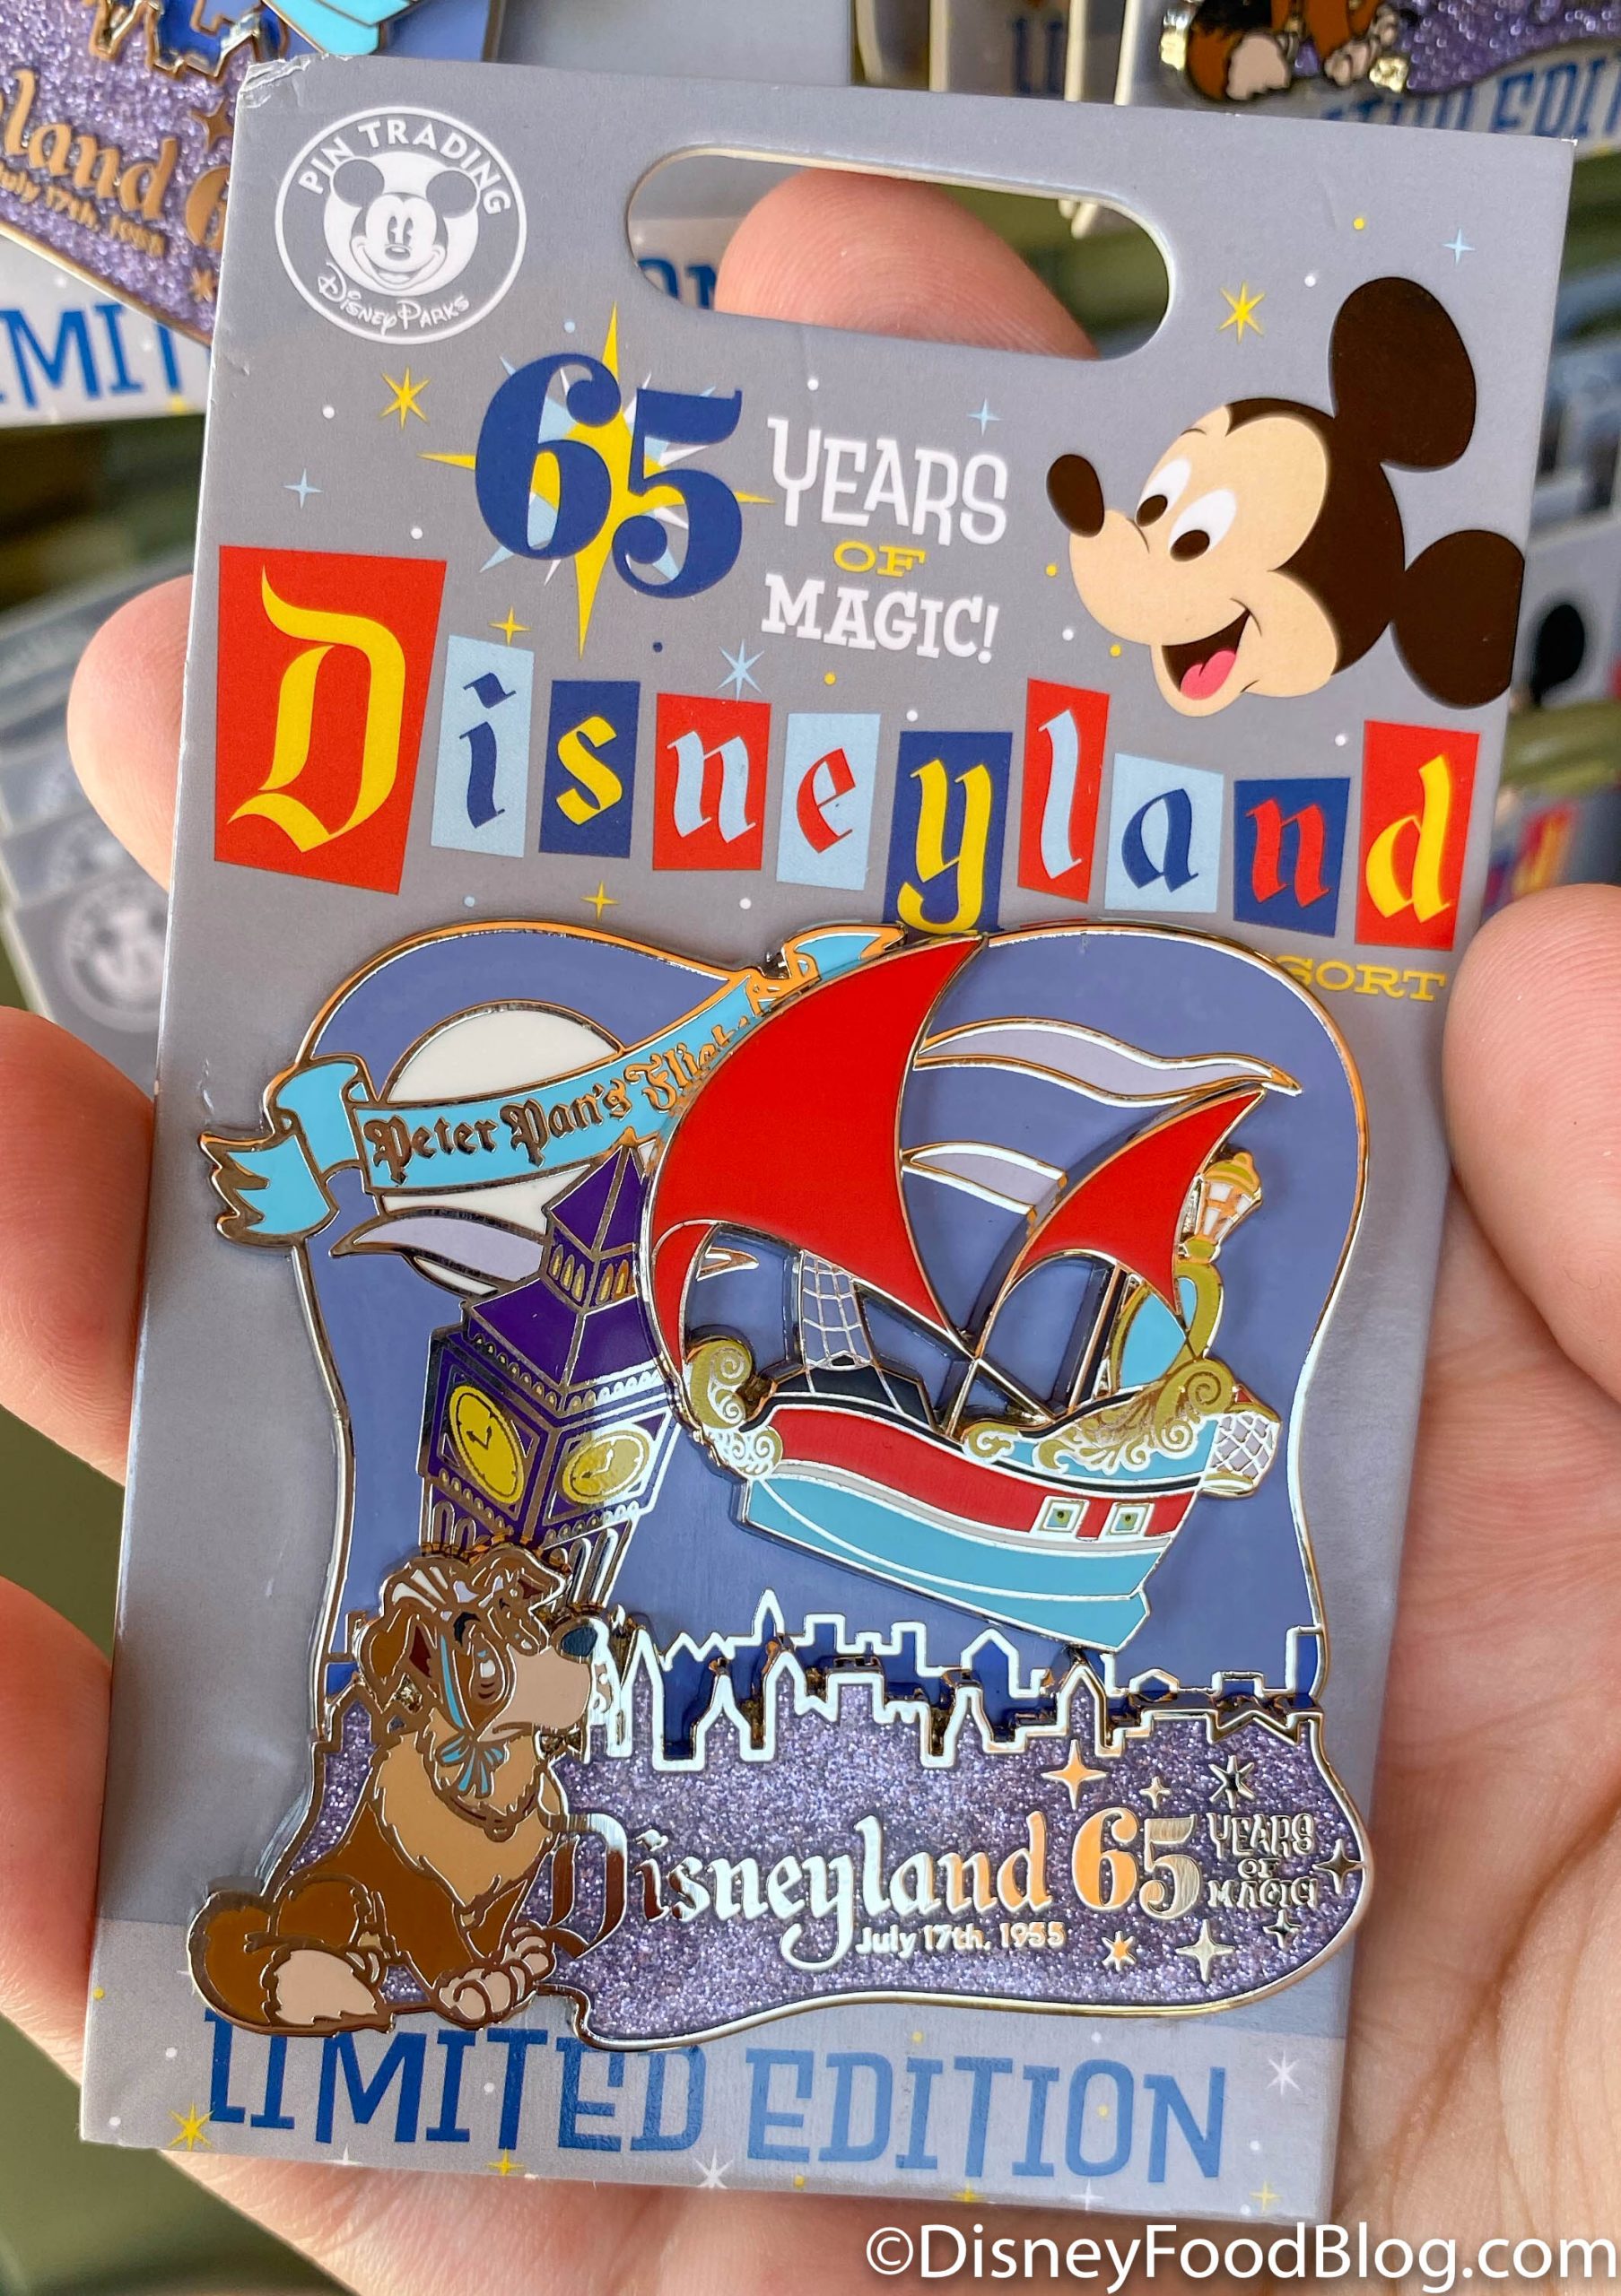 Limited Edition Disneyland 65th Anniversary Pins Are Now